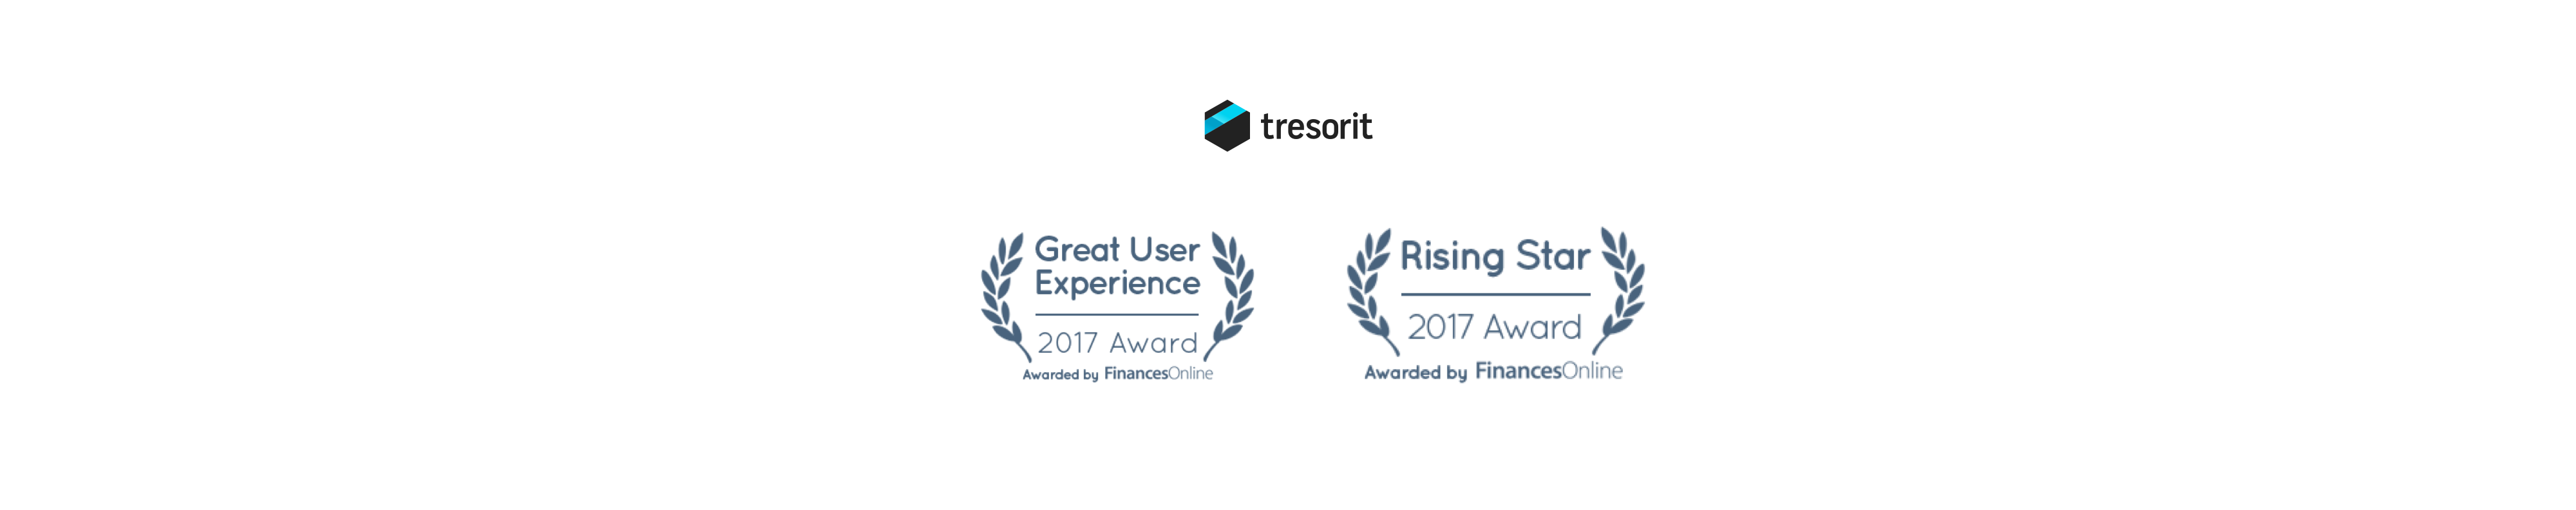 Tresorit receives Great User Experience and Rising Star awards from FinancesOnline